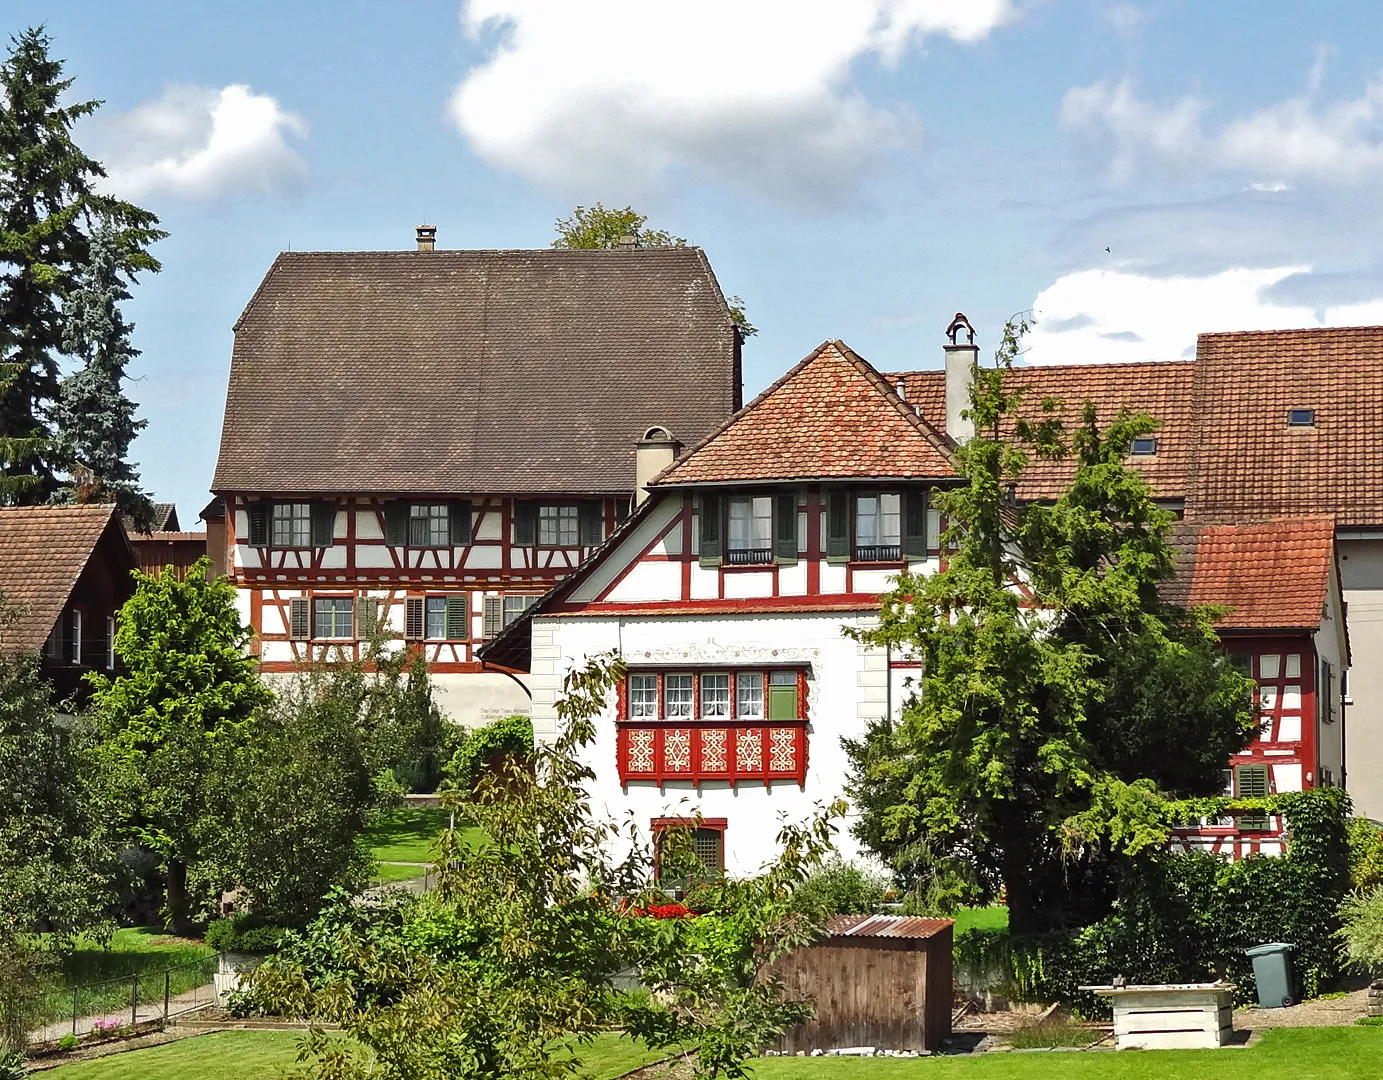 Photo showing: Timber framed houses (Hohes Haus and "Alter Kehlhof") in Märstetten, Switzerland